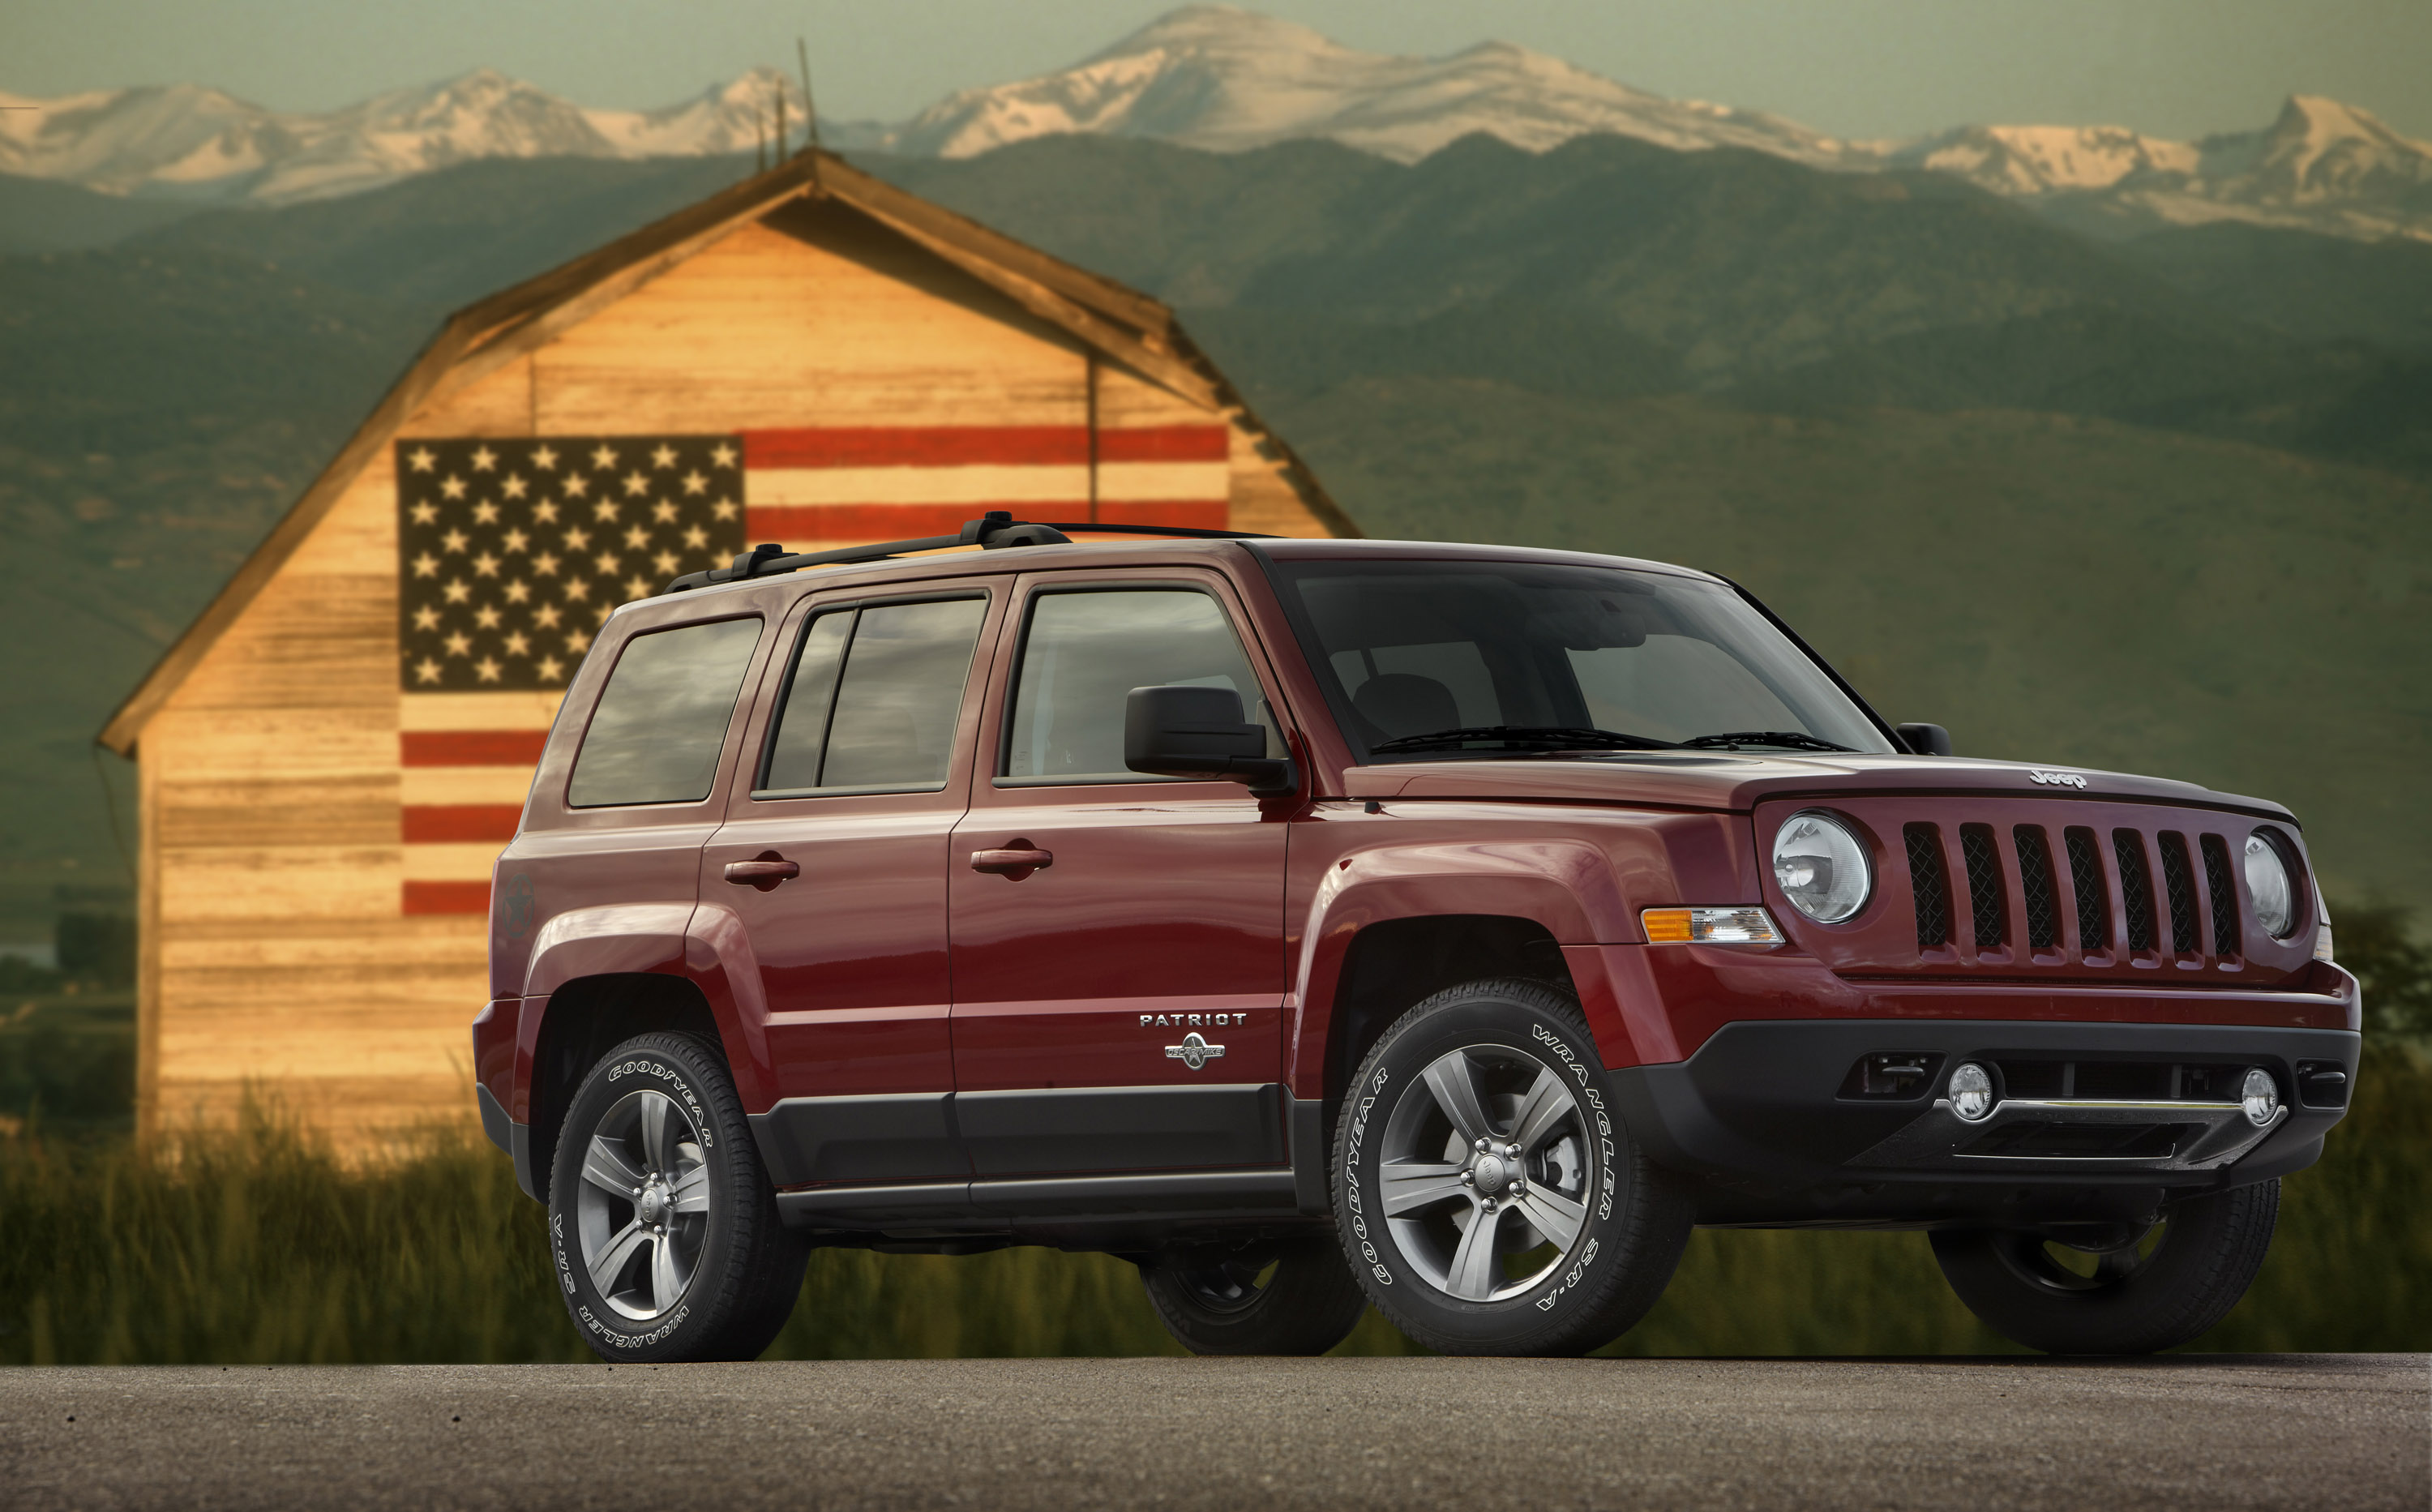 2013 Jeep Patriot Freedom Edition Pays Tribute to . Military members